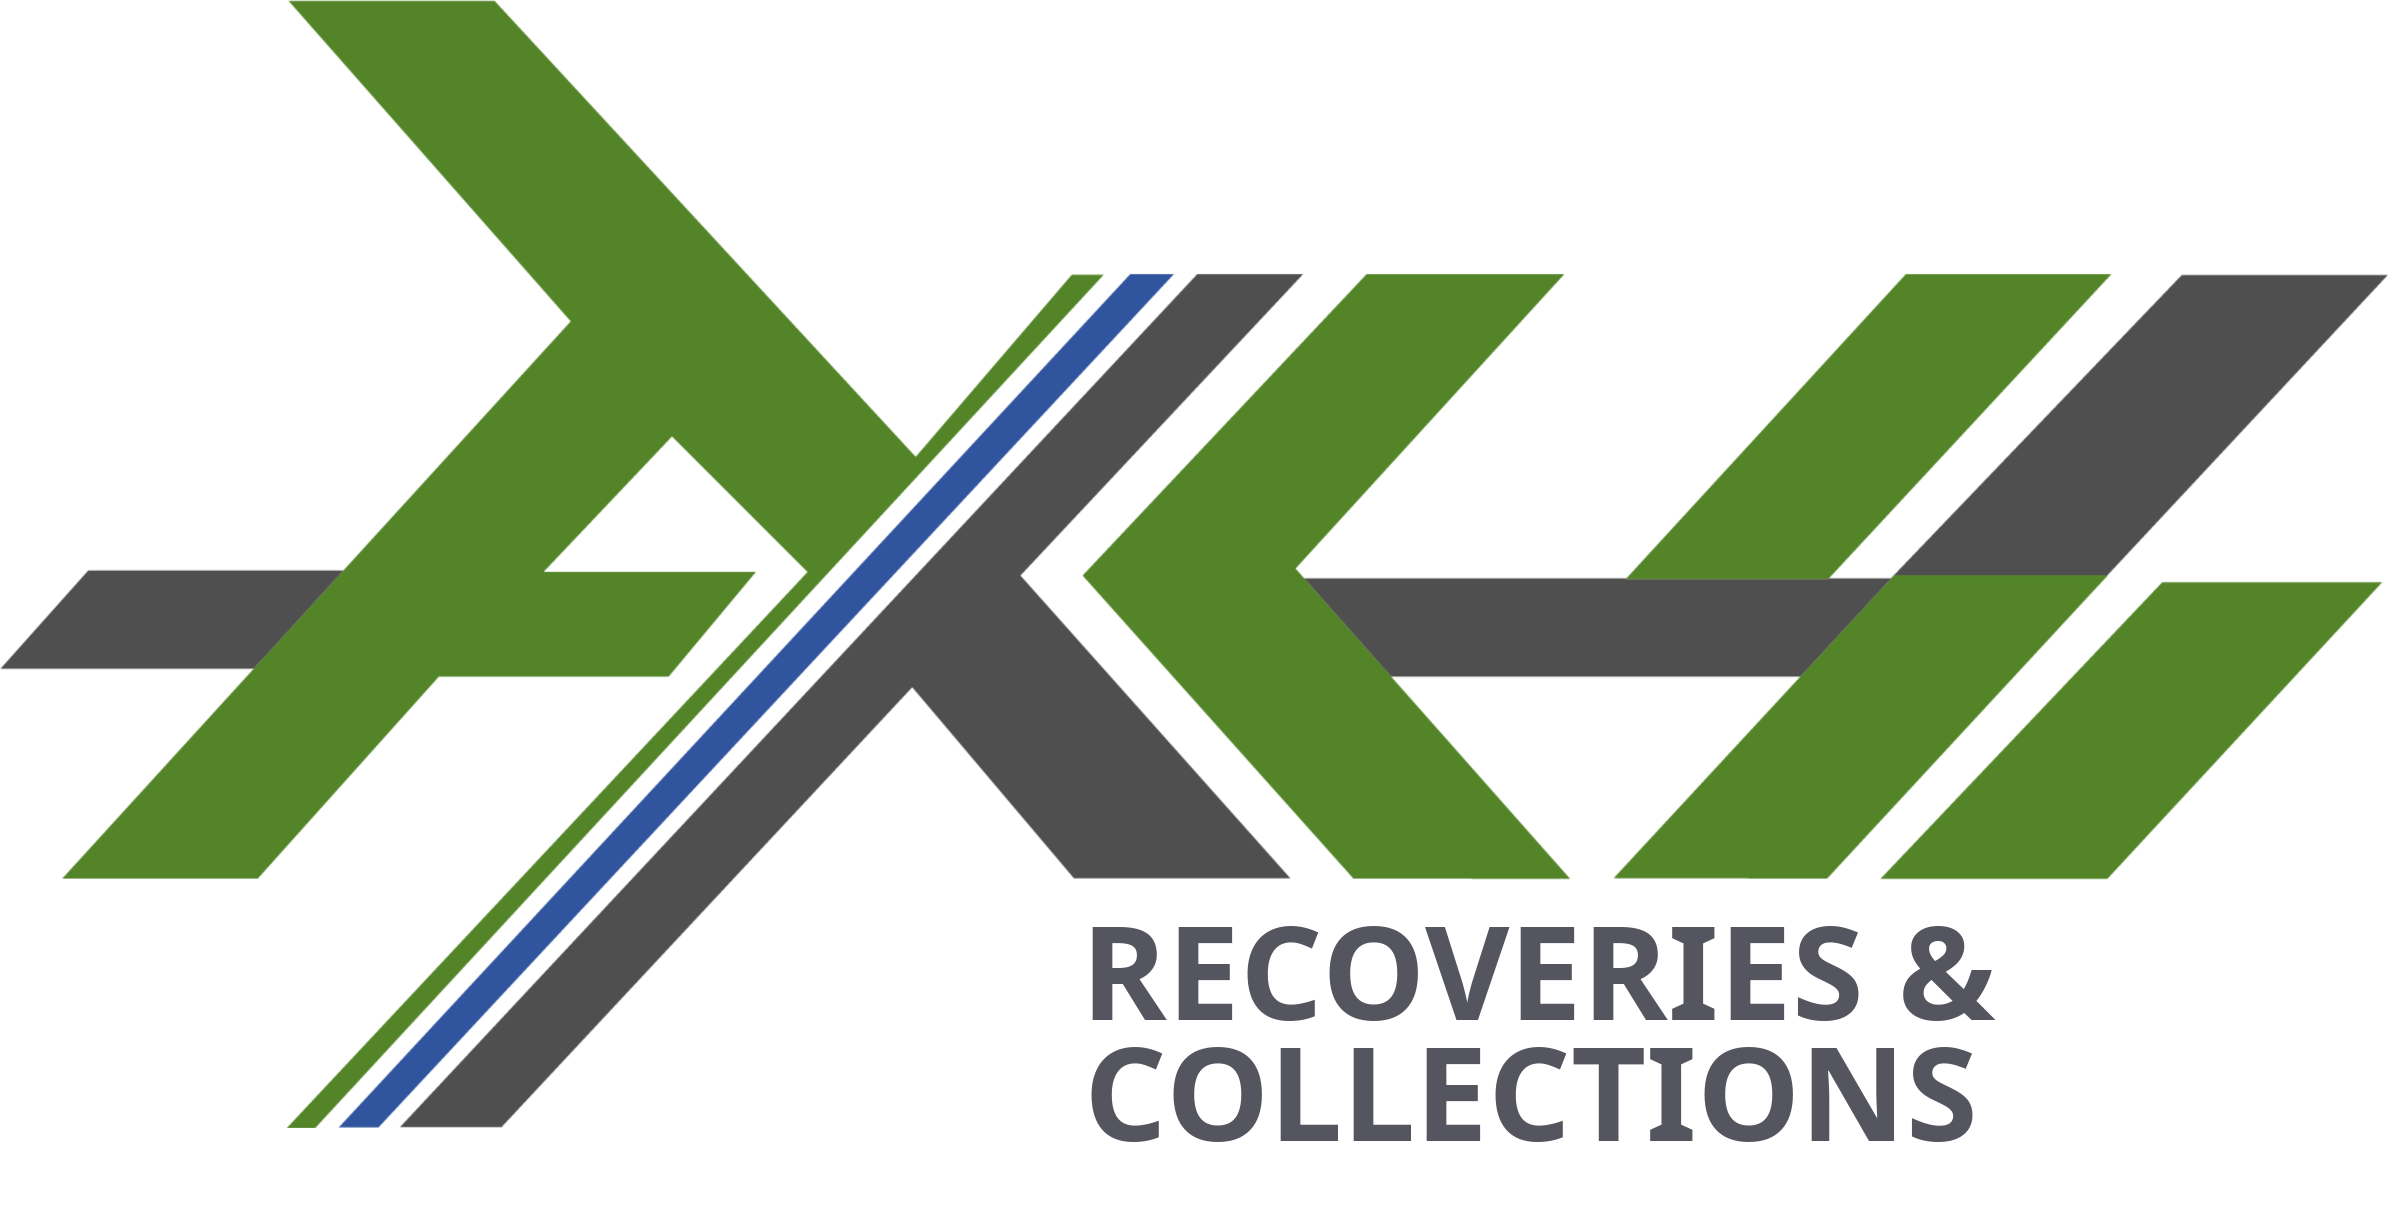 Axess Recoveries & Collections